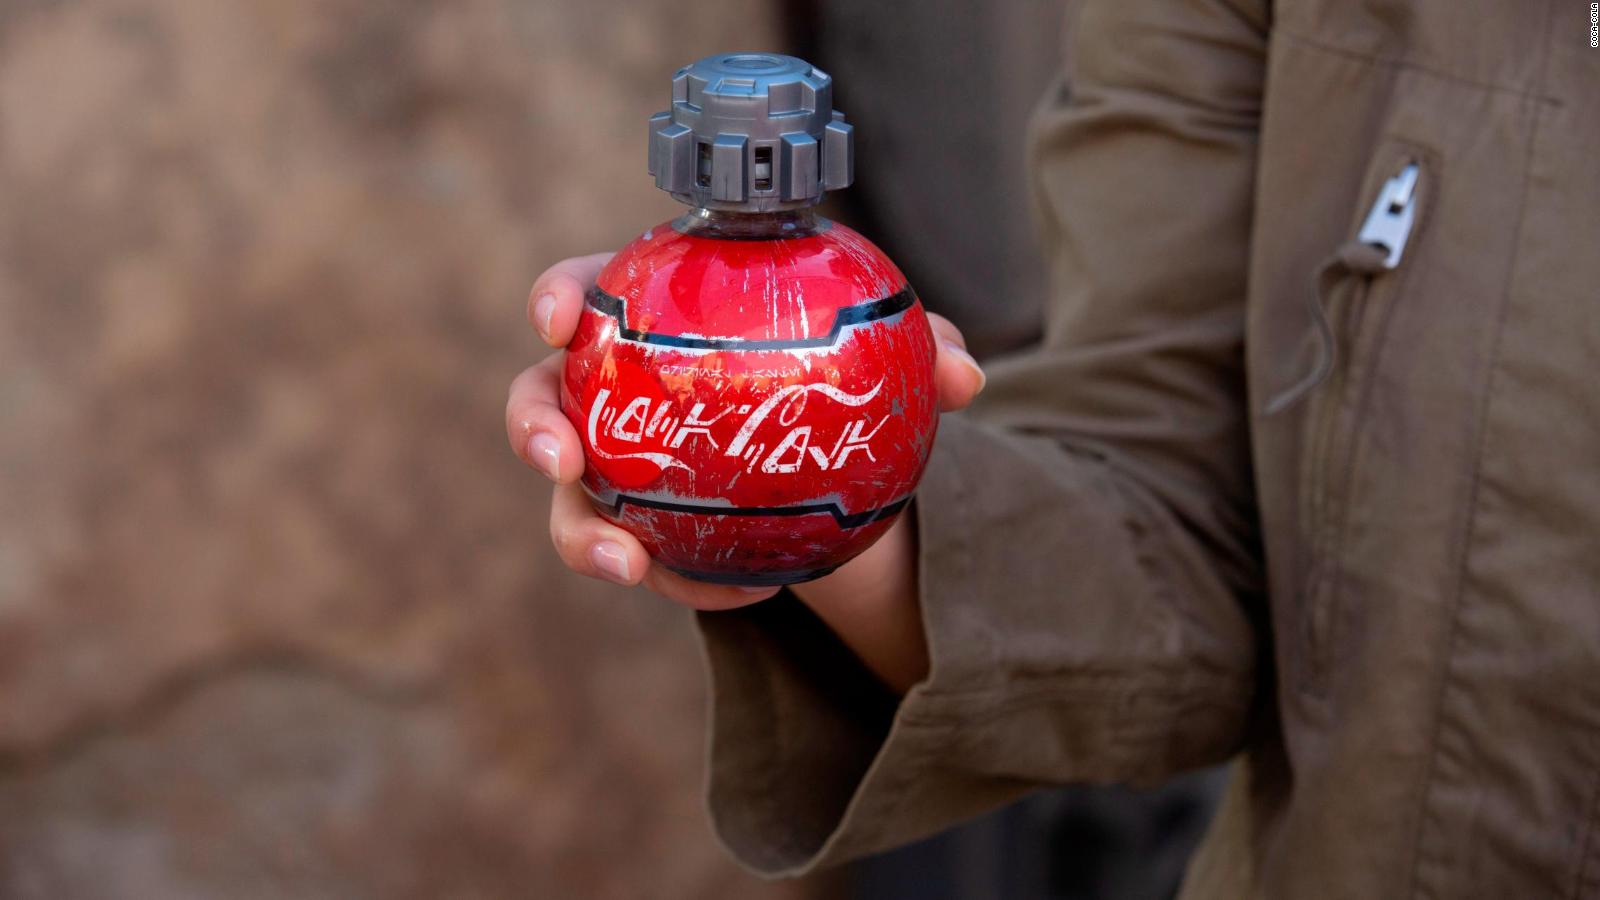 FULL COCA COLA STARWARS LIMITED EDITION CANS 2019 